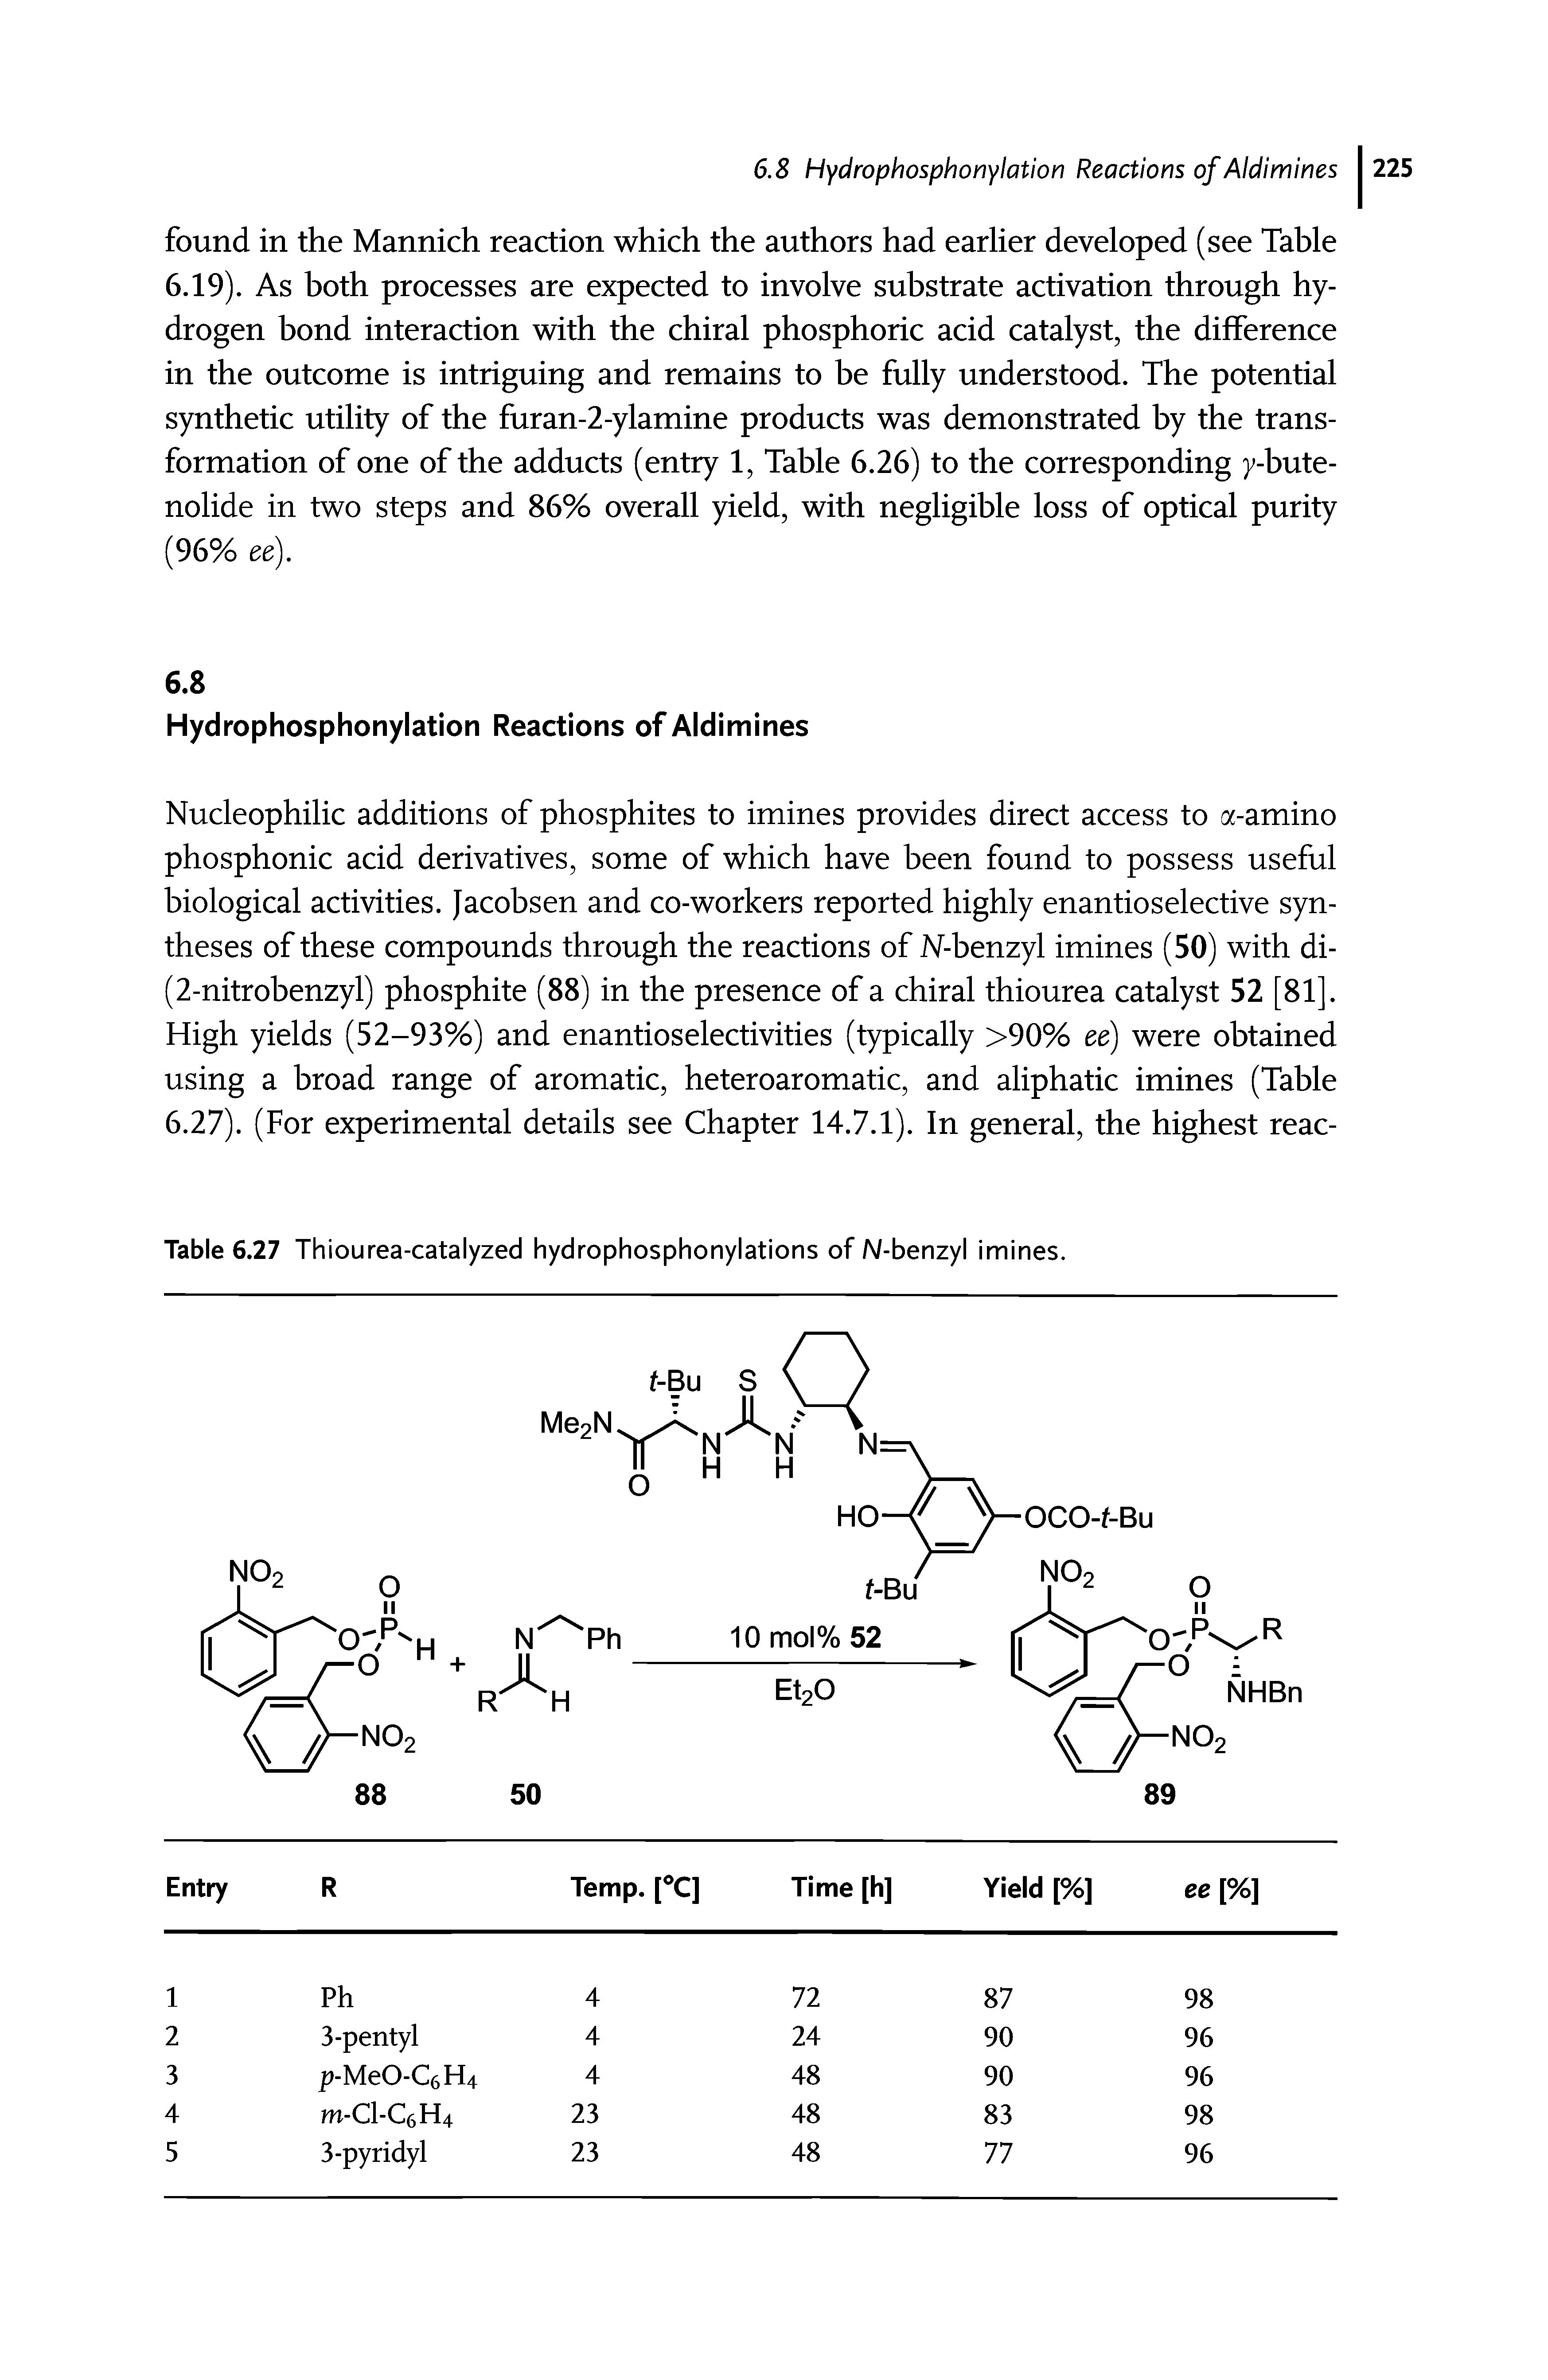 Table 6.27 Thiourea-catalyzed hydrophosphonylations of N-benzyl imines.